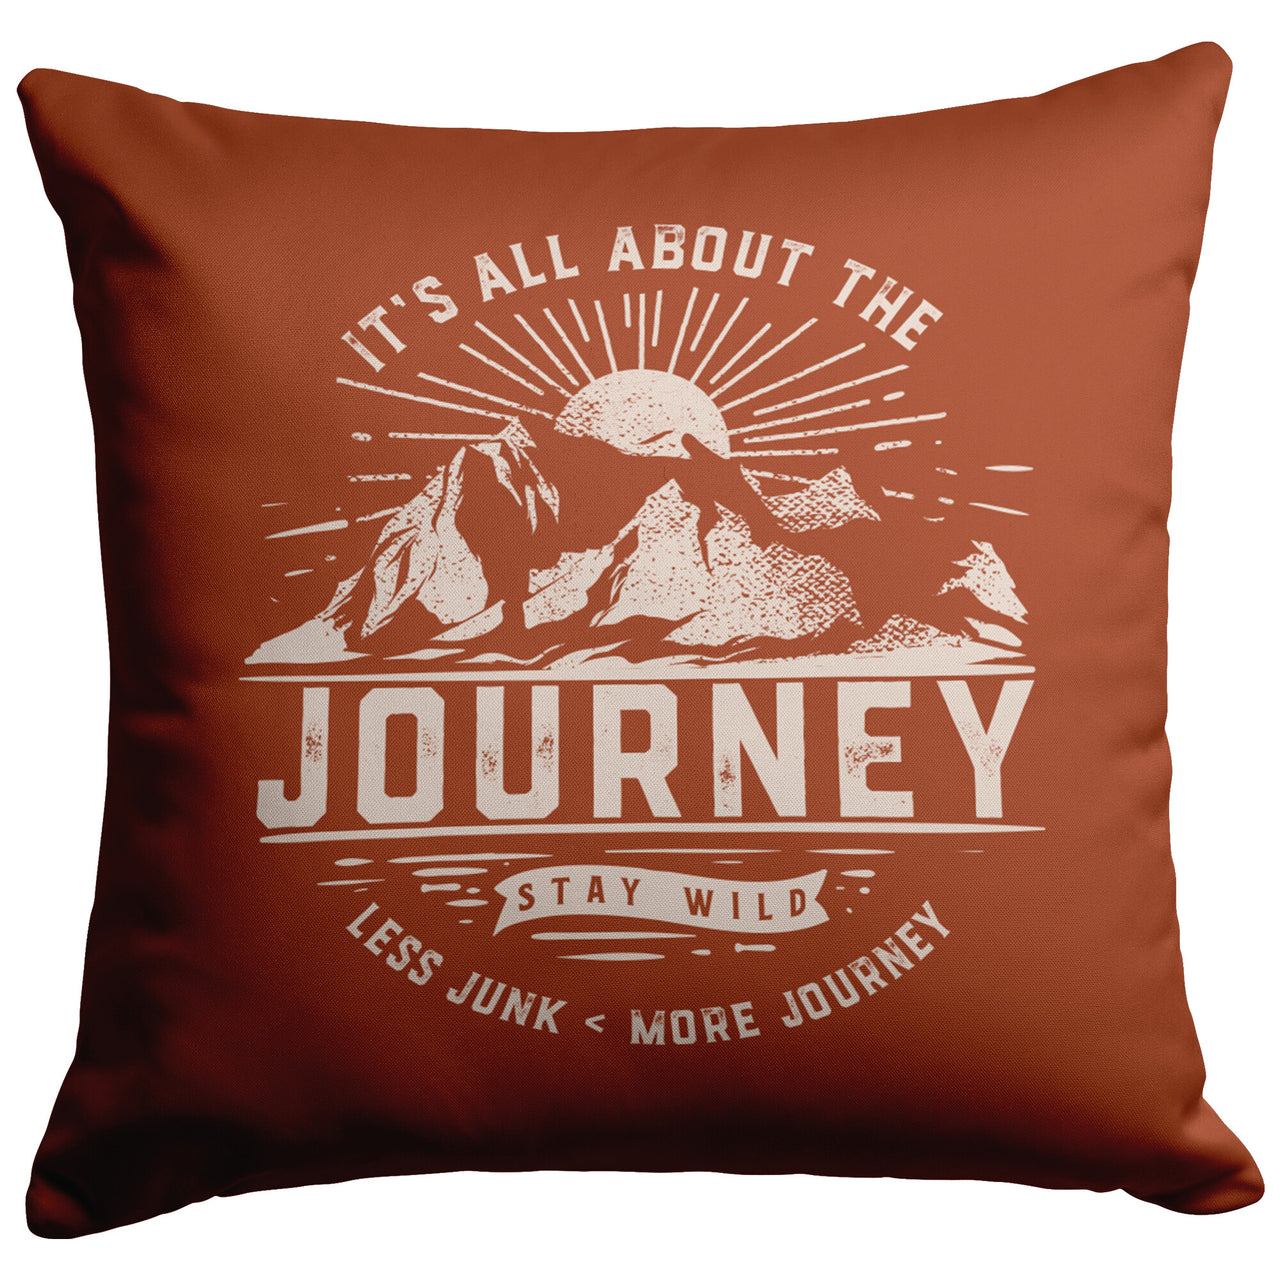 It's All About The Journey Rust Pillows